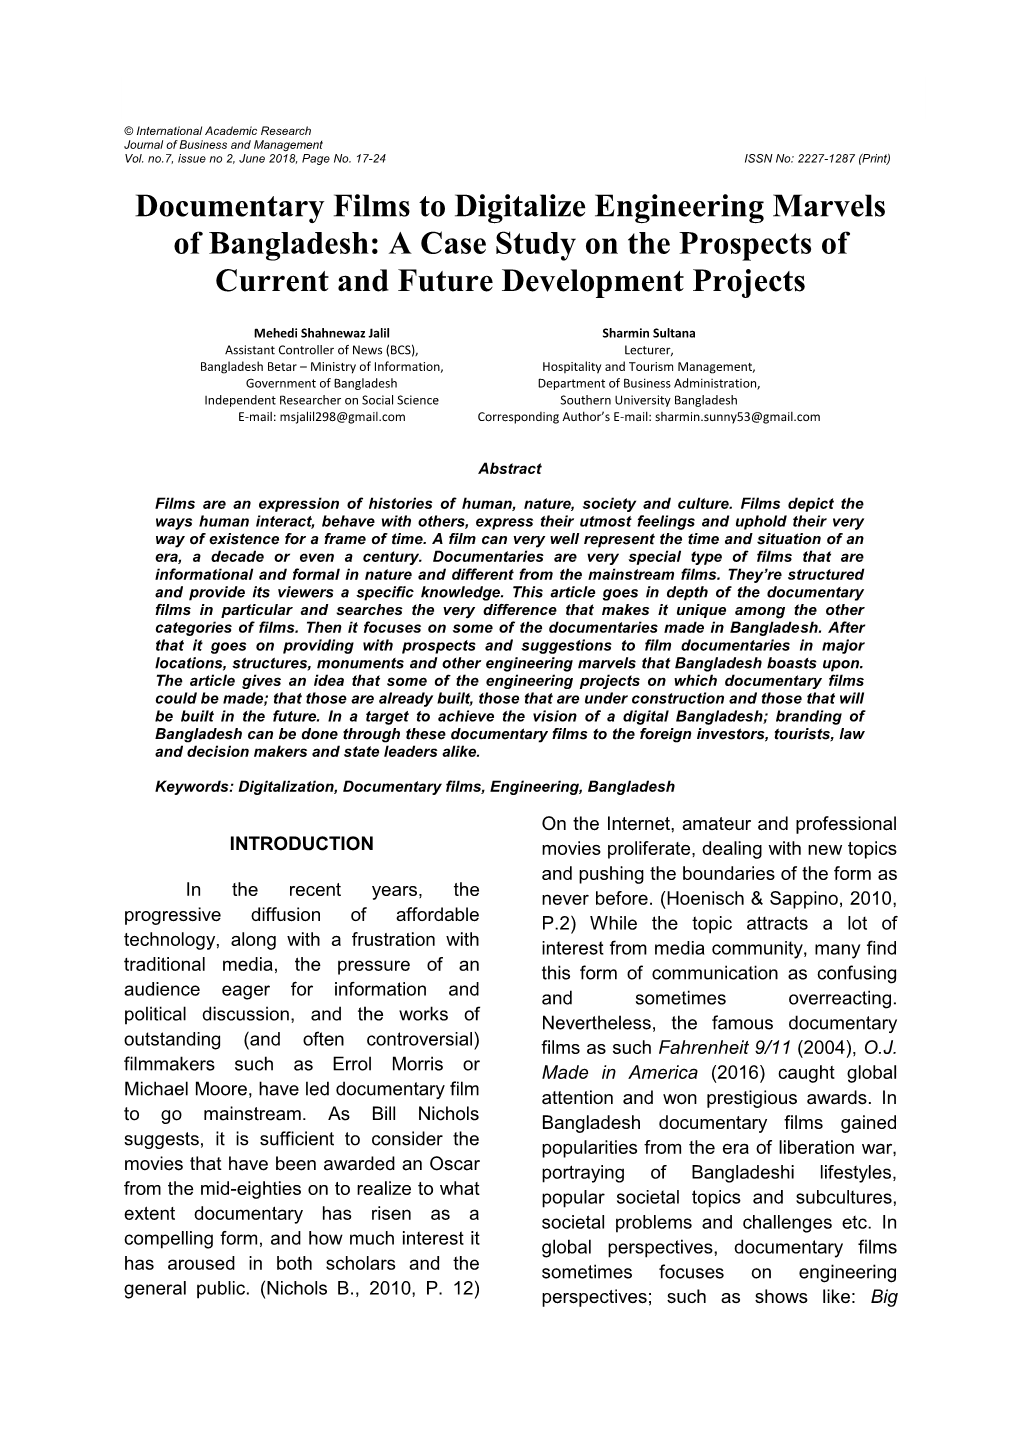 Documentary Films to Digitalize Engineering Marvels of Bangladesh: a Case Study on the Prospects of Current and Future Development Projects